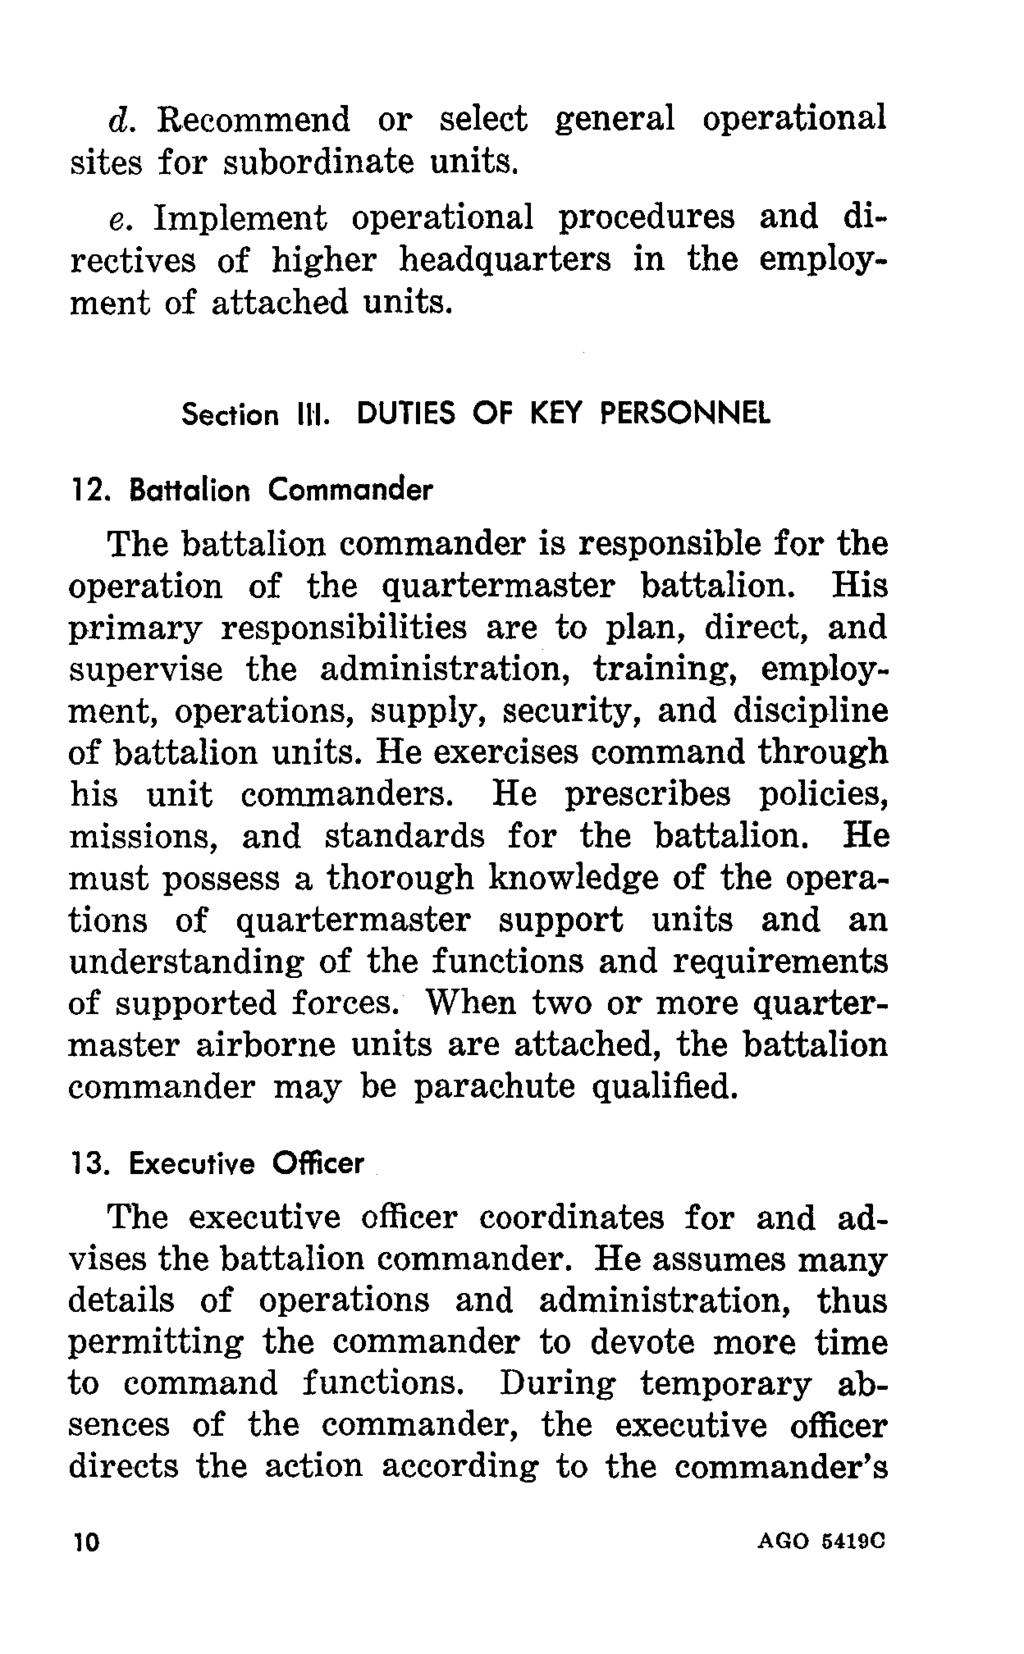 d. Recommend or select general operational sites for subordinate units. e. Implement operational procedures and directives of higher headquarters in the employment of attached units. Section II1.